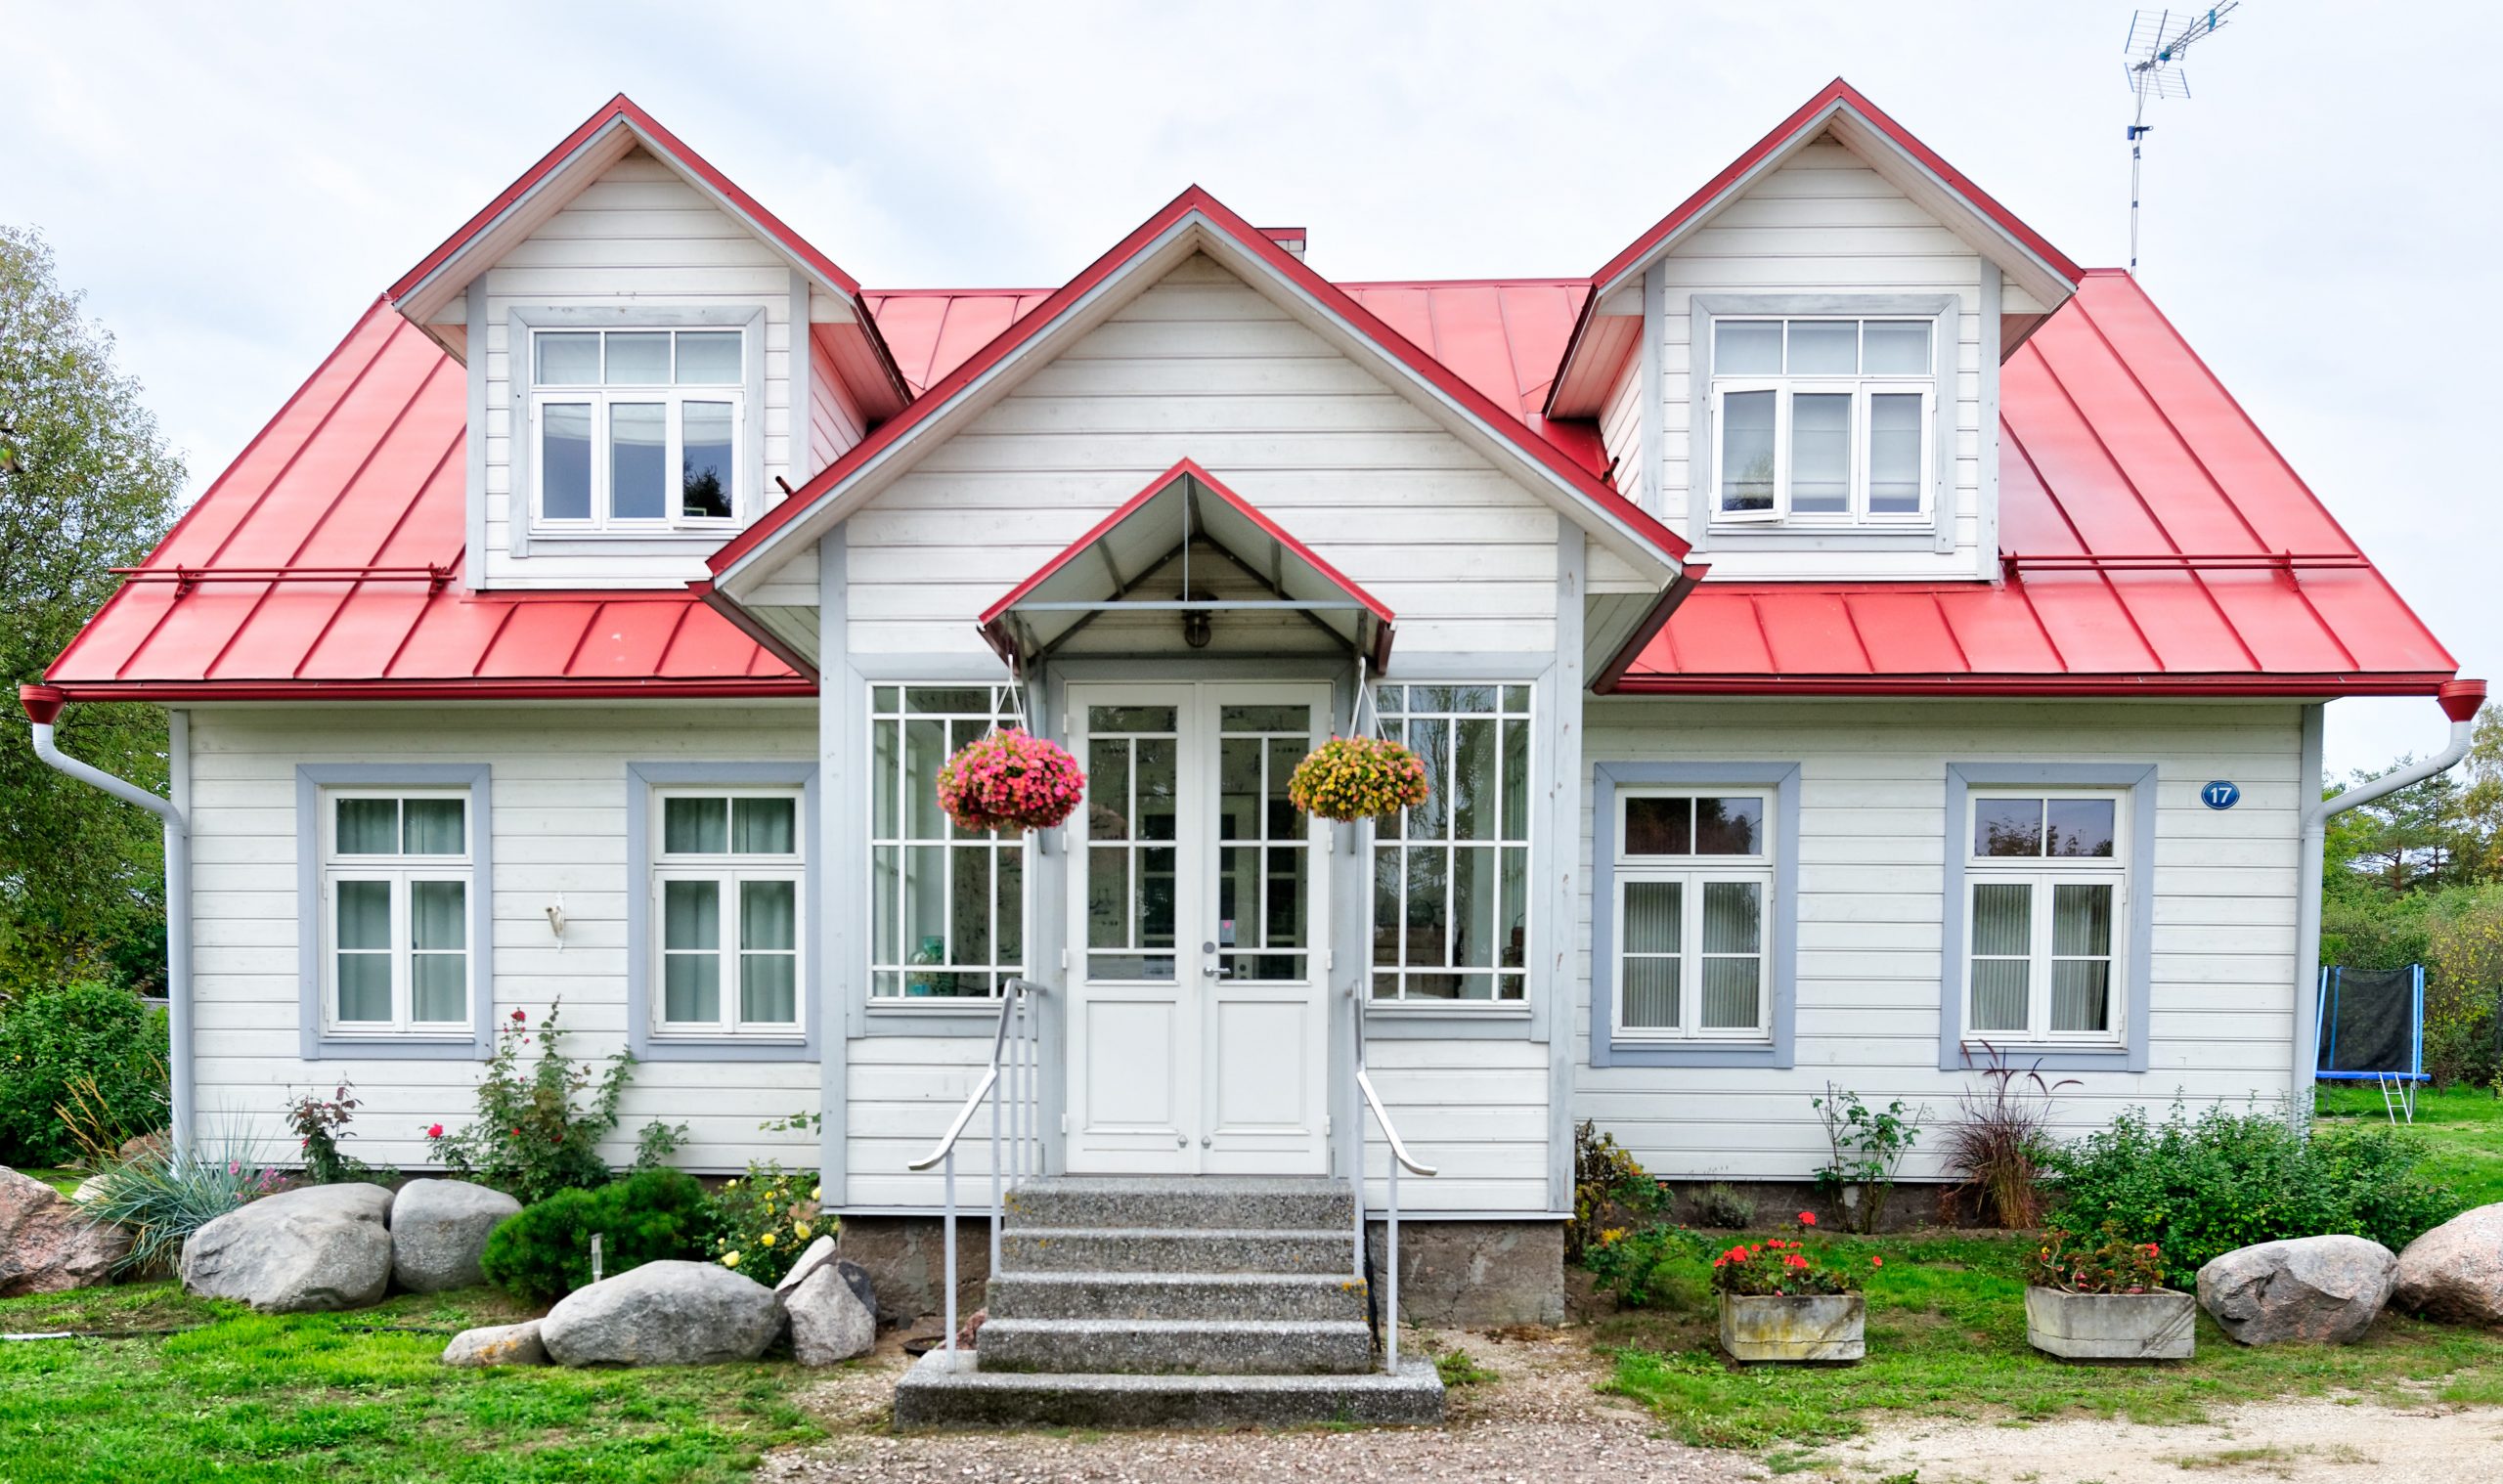 What is the difference between an eco-friendly home and a traditional home?